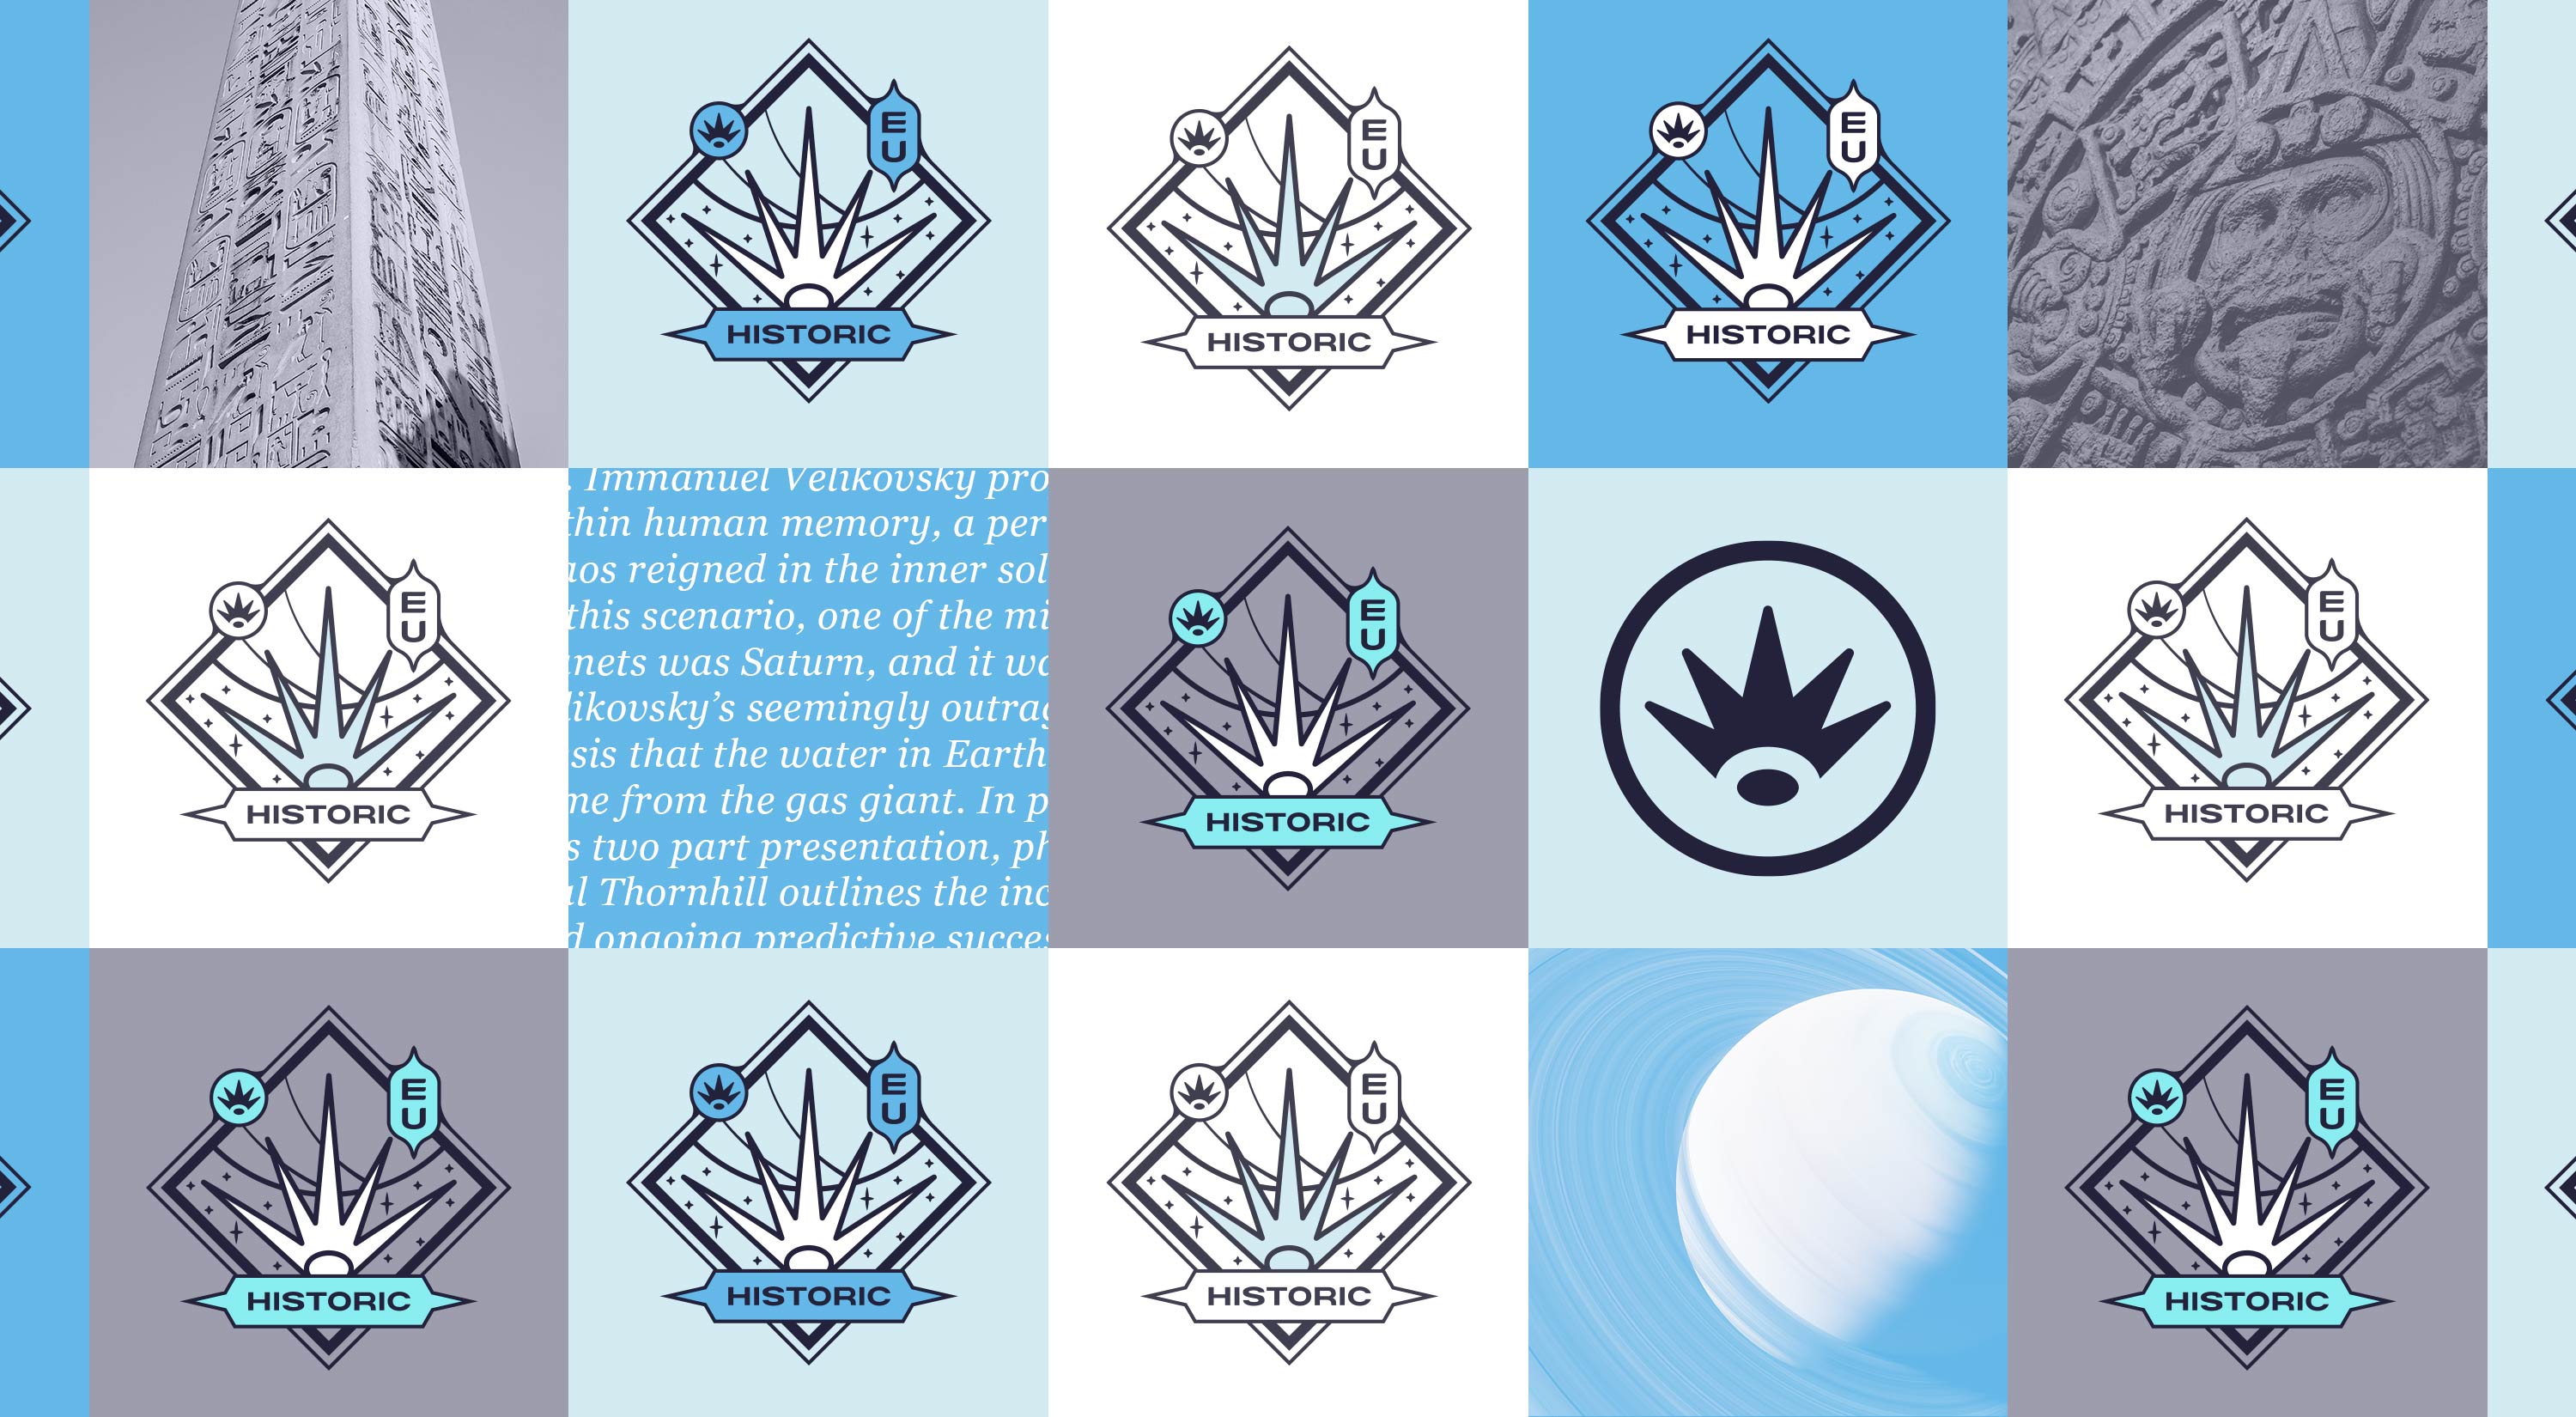 Multiple Historic Science Crest Logo Designs on Different Backgrounds